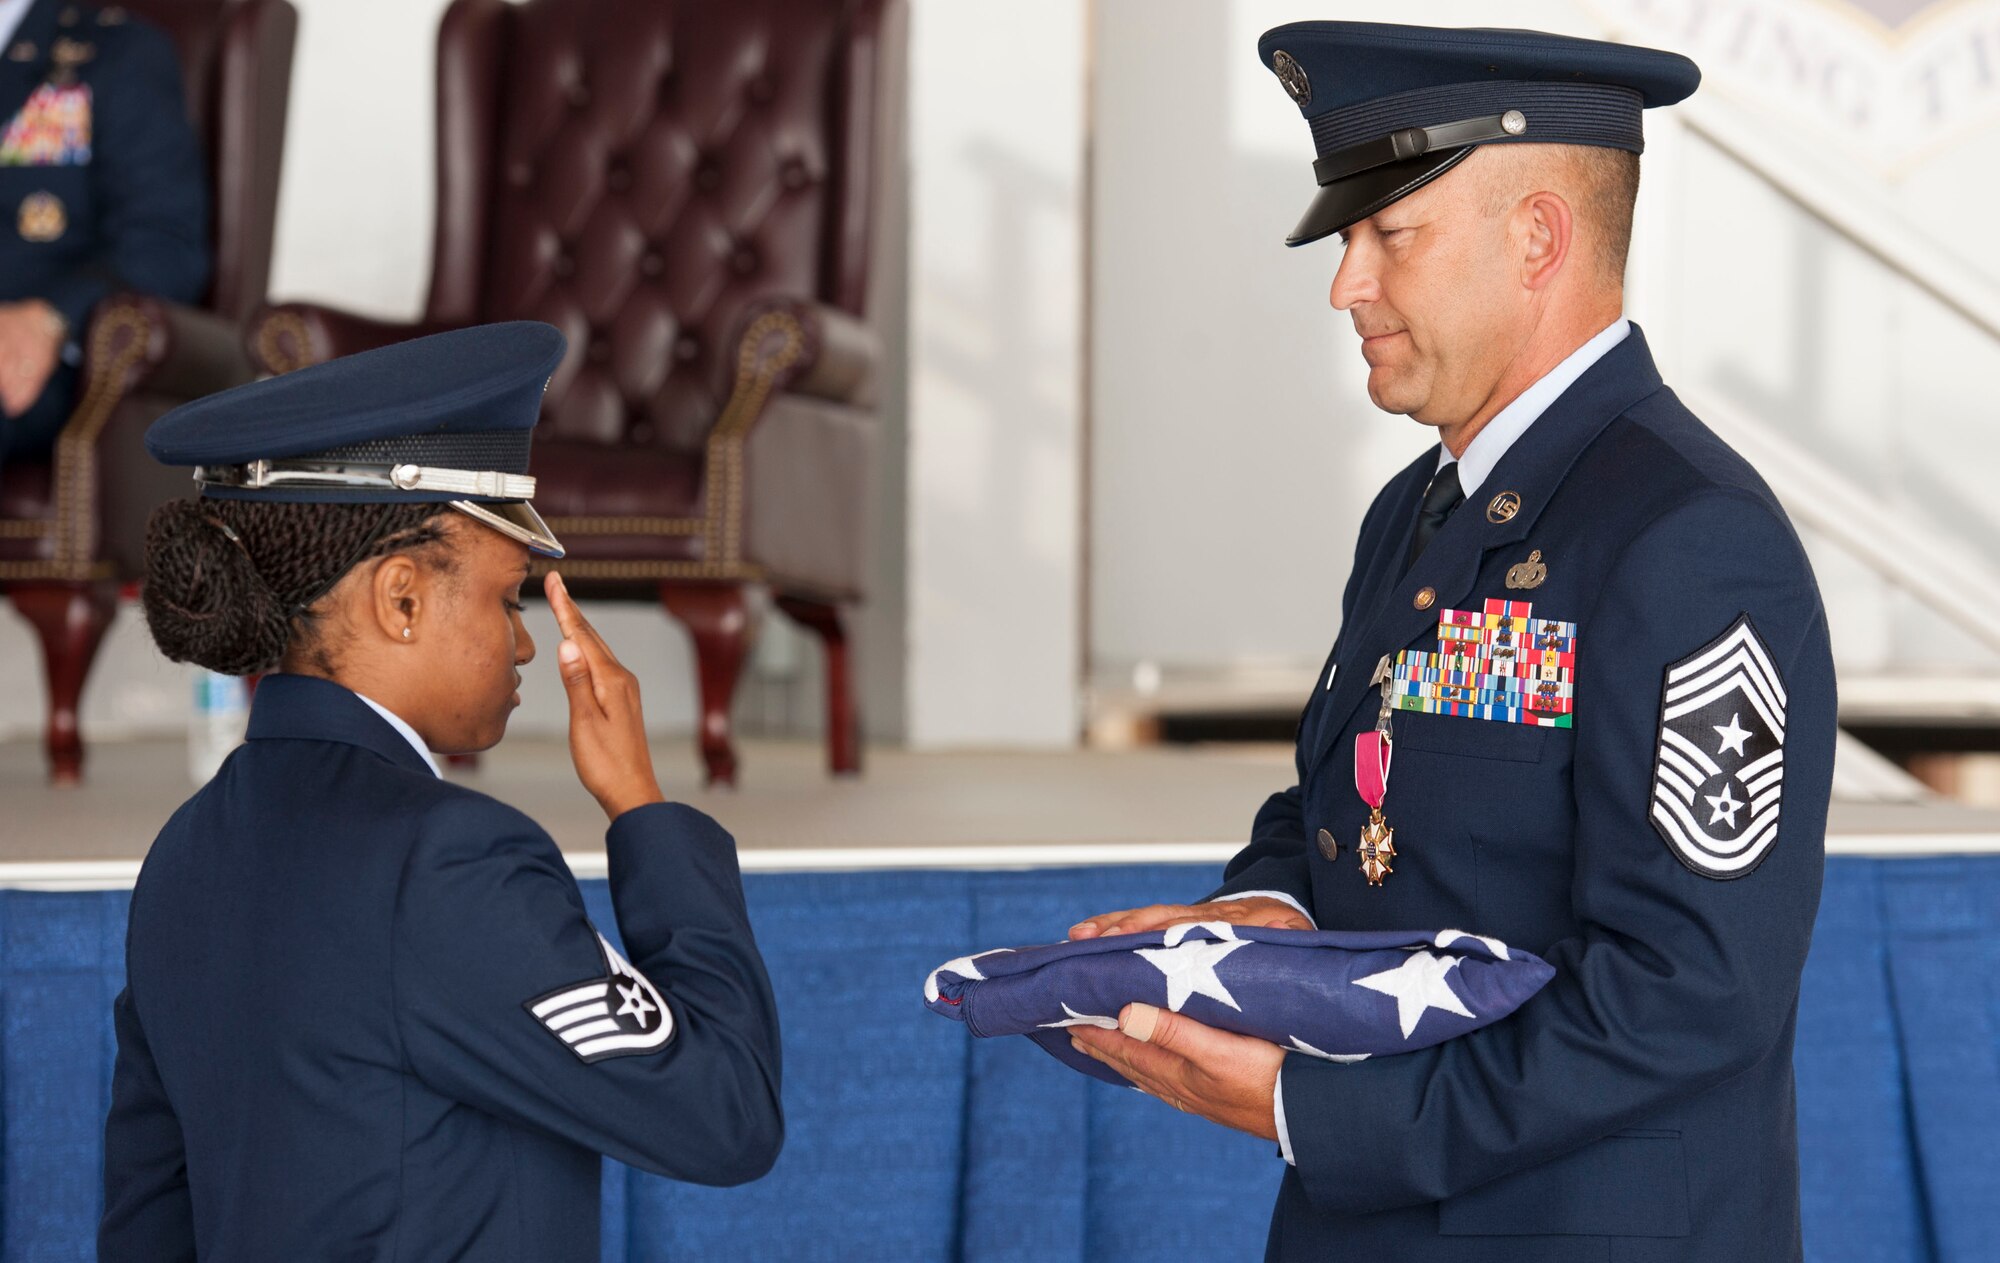 U.S. Air Force Staff Sgt. Latosha Ross, 23d Force Support Squadron base honor guard, salutes the flag after presenting it to U.S. Air Force Chief Master Sgt. David Kelch, 23d Wing command chief, during his retirement ceremony at Moody Air Force Base, Ga., May 26, 2016. Kelch, who has served as the 23d WG's command chief since July of 2014, retired after 29 years and seven months of military service. (U.S. Air Force photo by Andrea Jenkins/Released)